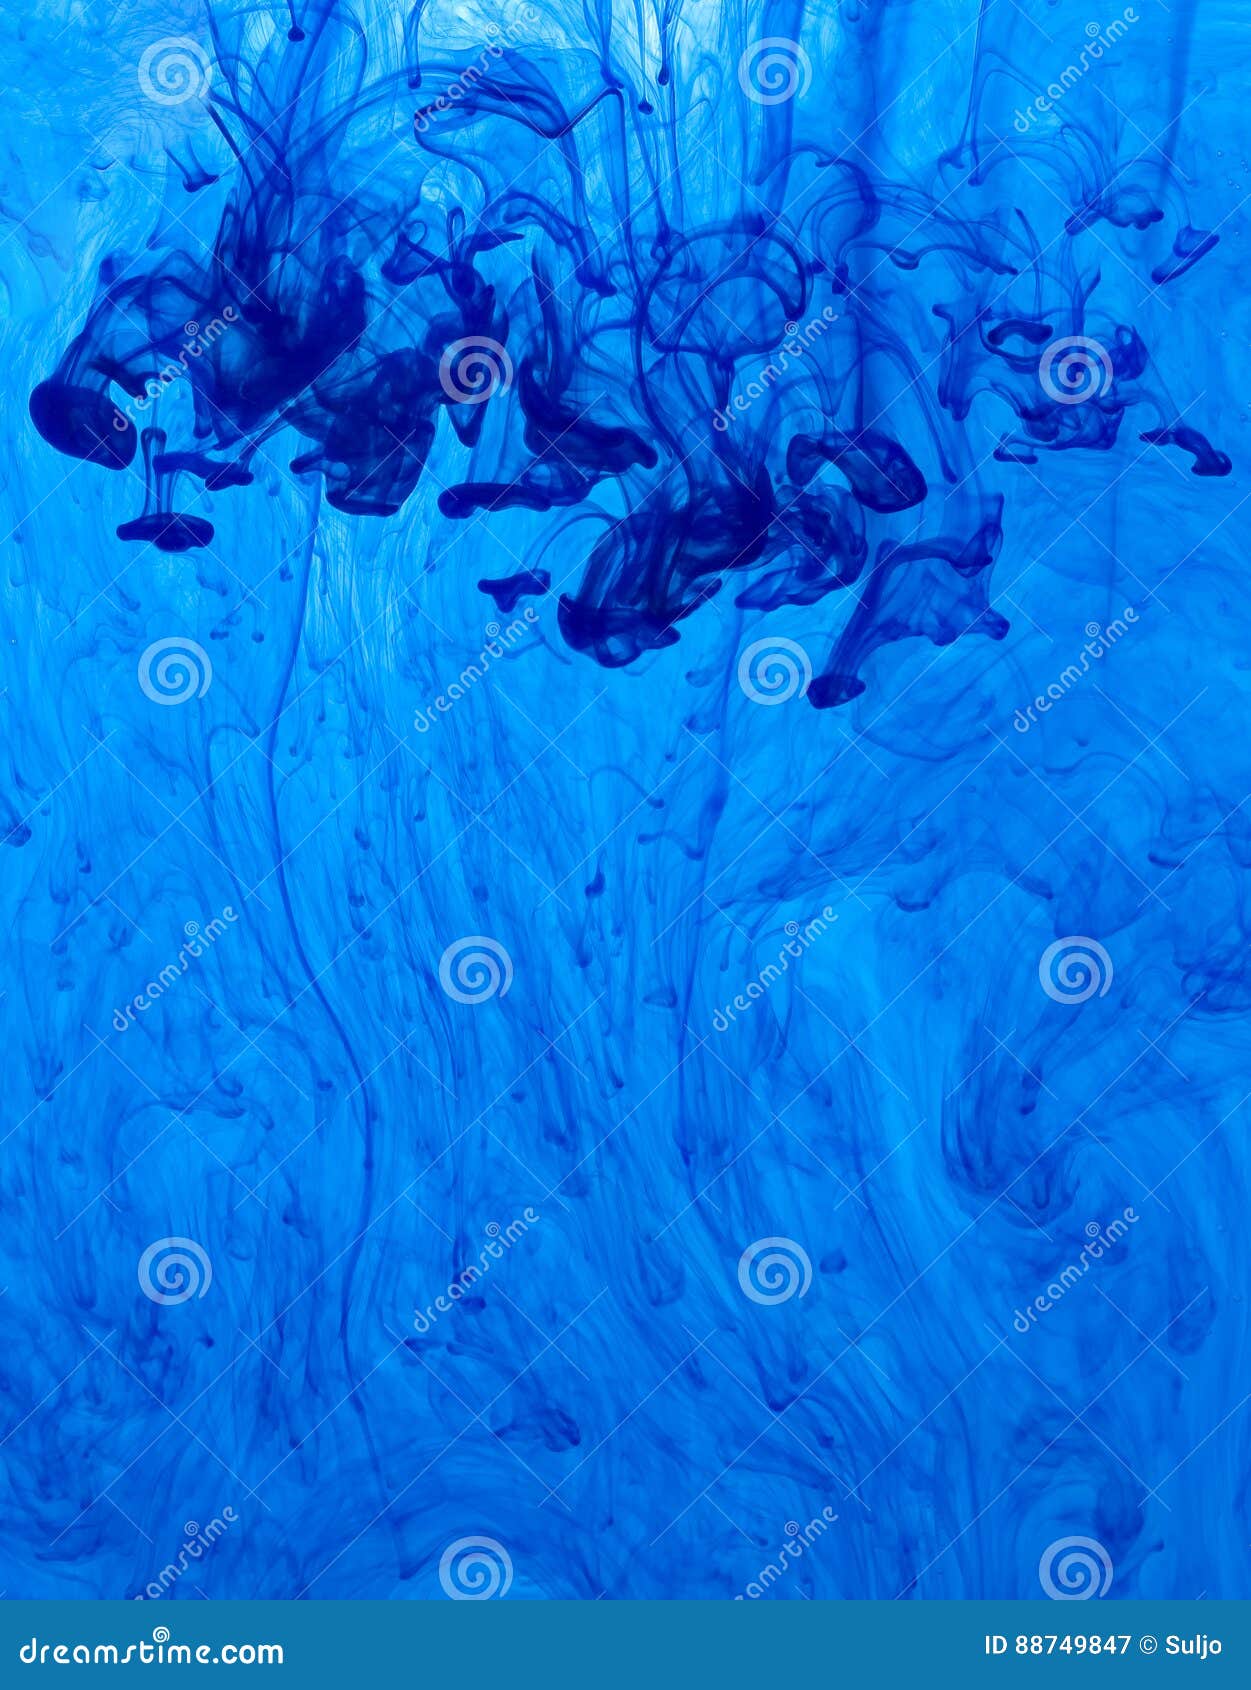 Blue Tint Background stock image. Image of flowing, copyspace - 88749847